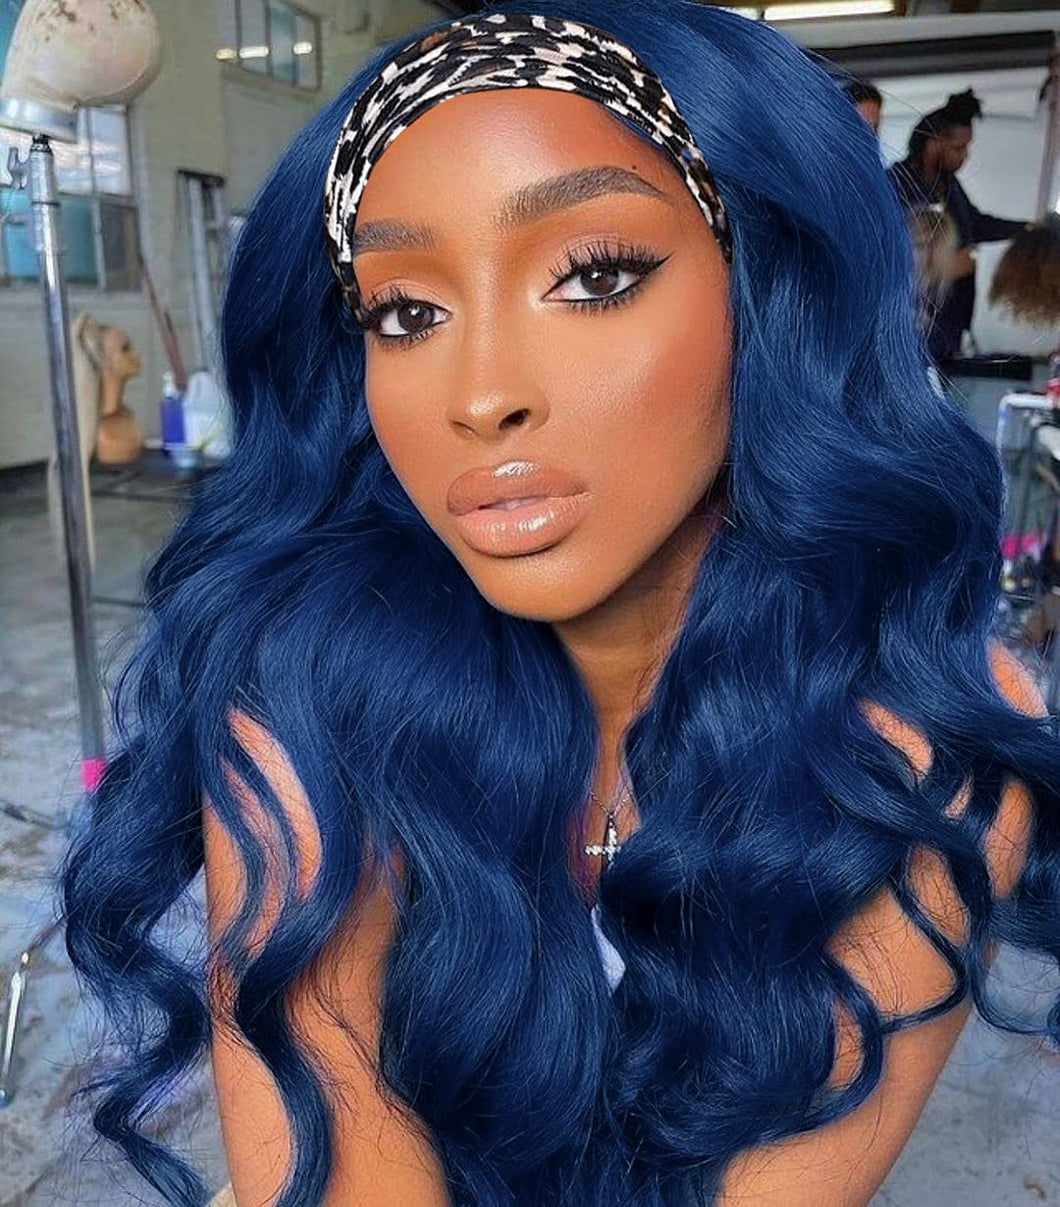 Lexi Navy Blue Body Wave 22 Inches Synthetic Headband Wig